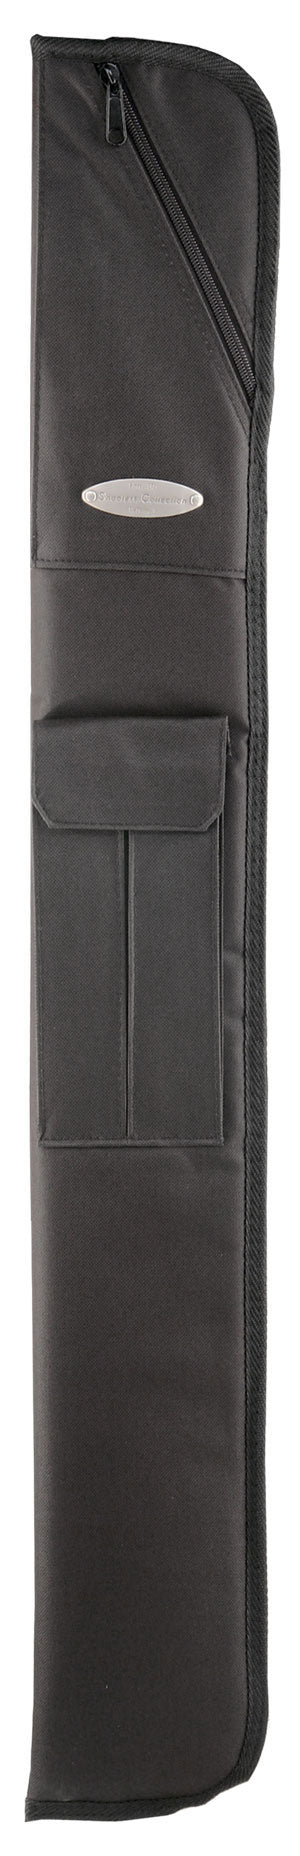 McDermott Black Soft Shooter Collection Cue Case